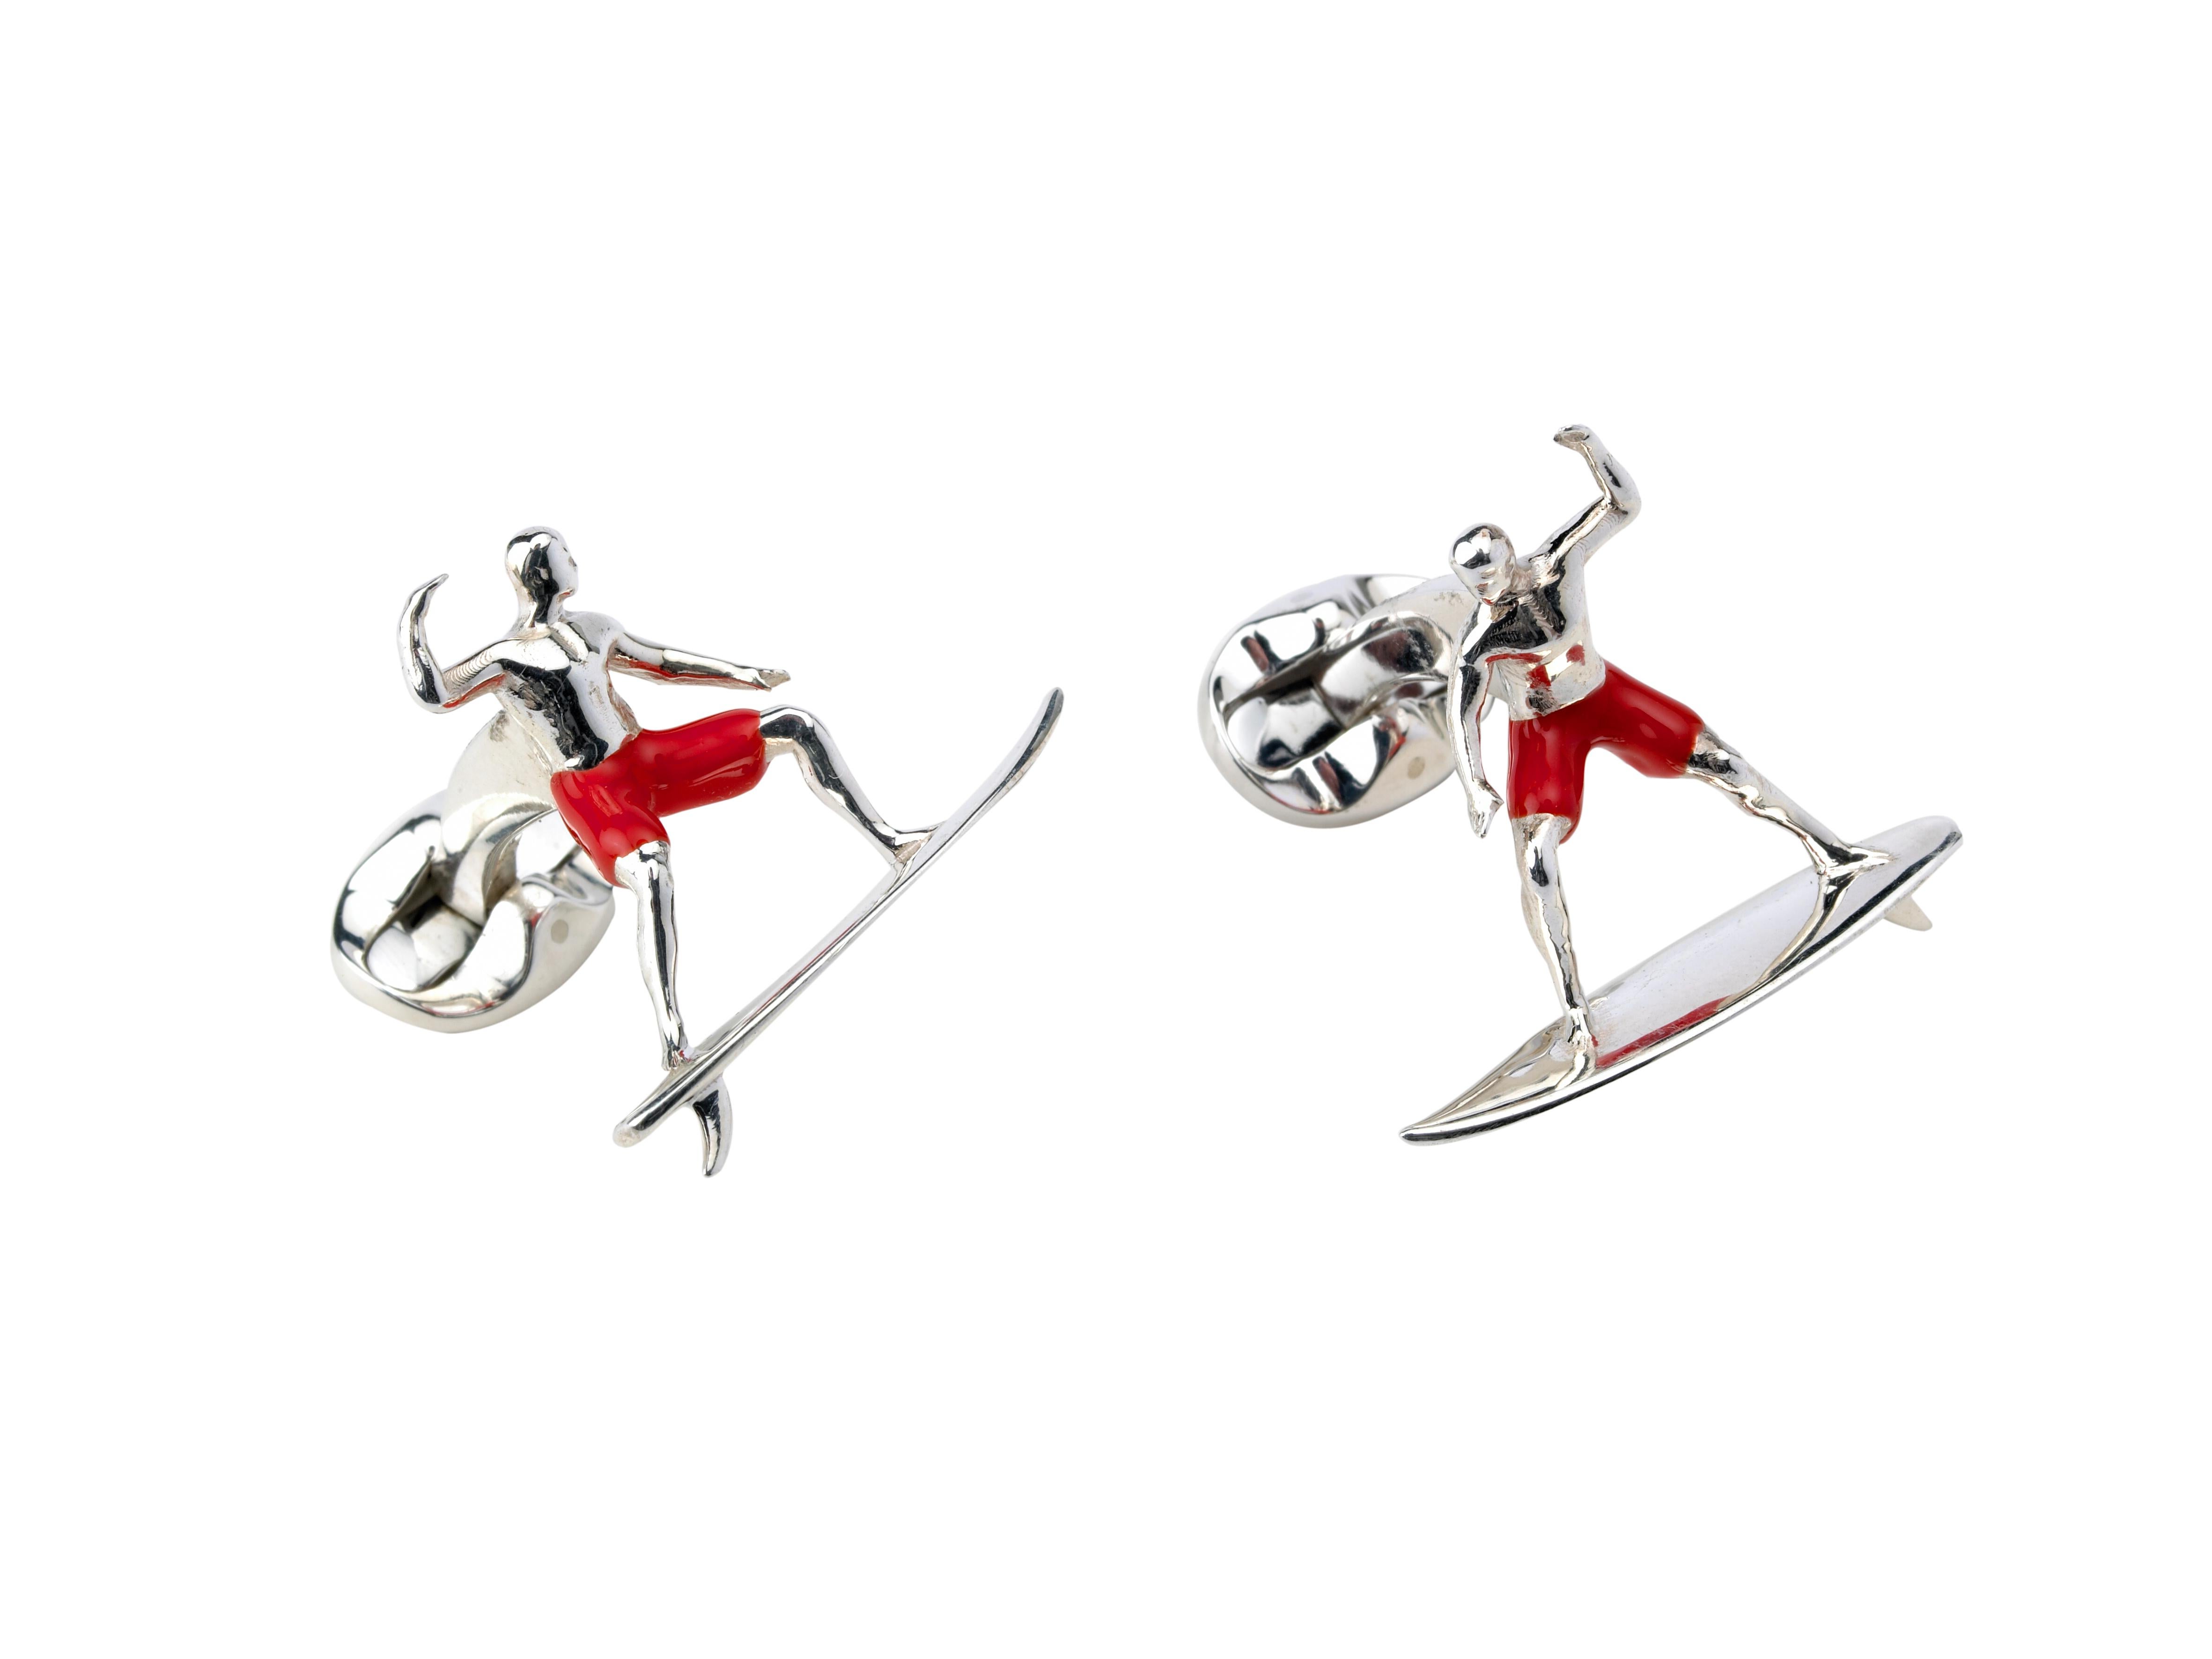 Contemporary Deakin & Francis Sterling Silver Surfer Cufflinks with Red Enamel Shorts